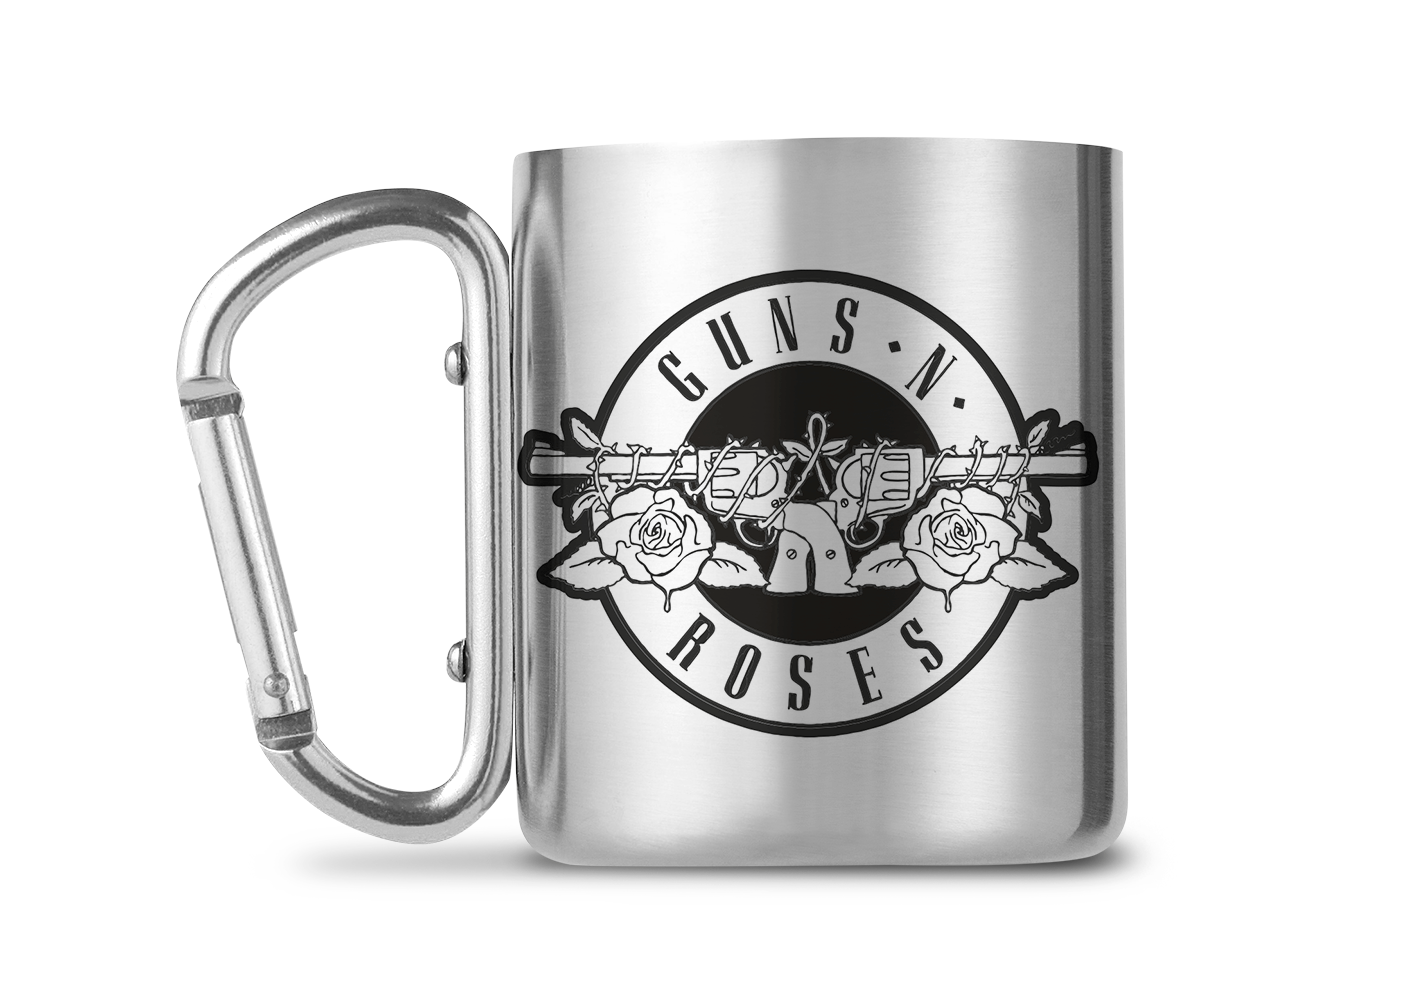 OFFICIAL GUNS AND ROSES LOGO BLACK DRINKING GLASS TUMBLER NEW IN GIFT BOX GB